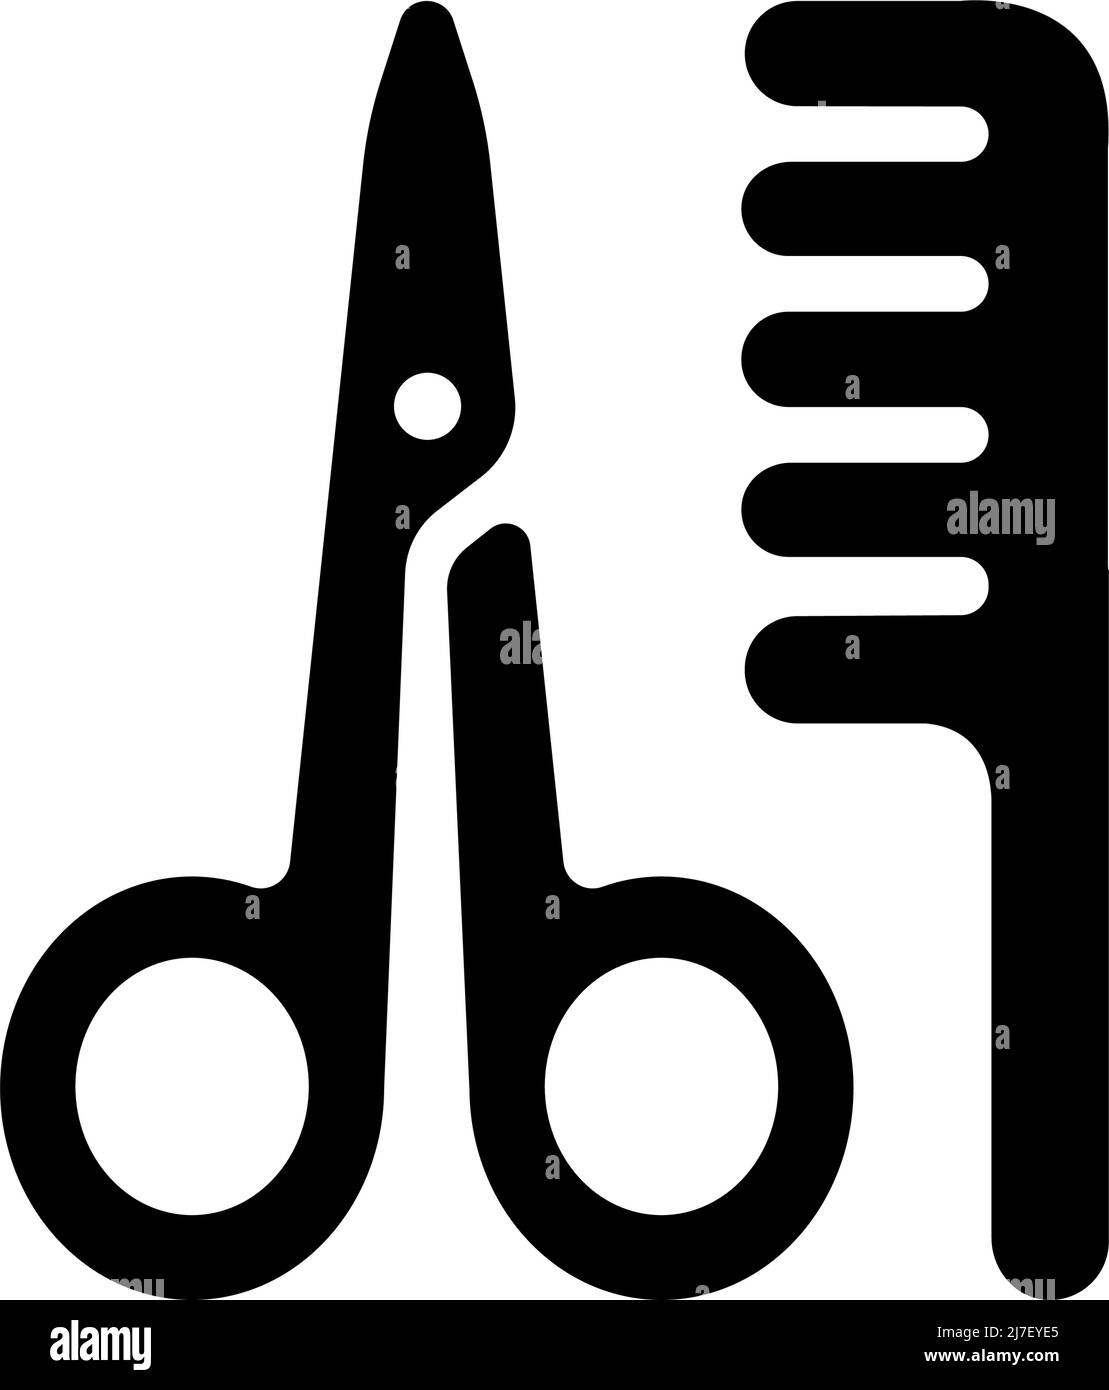 Barber, hair cut, trimming vector icon illustration Stock Vector